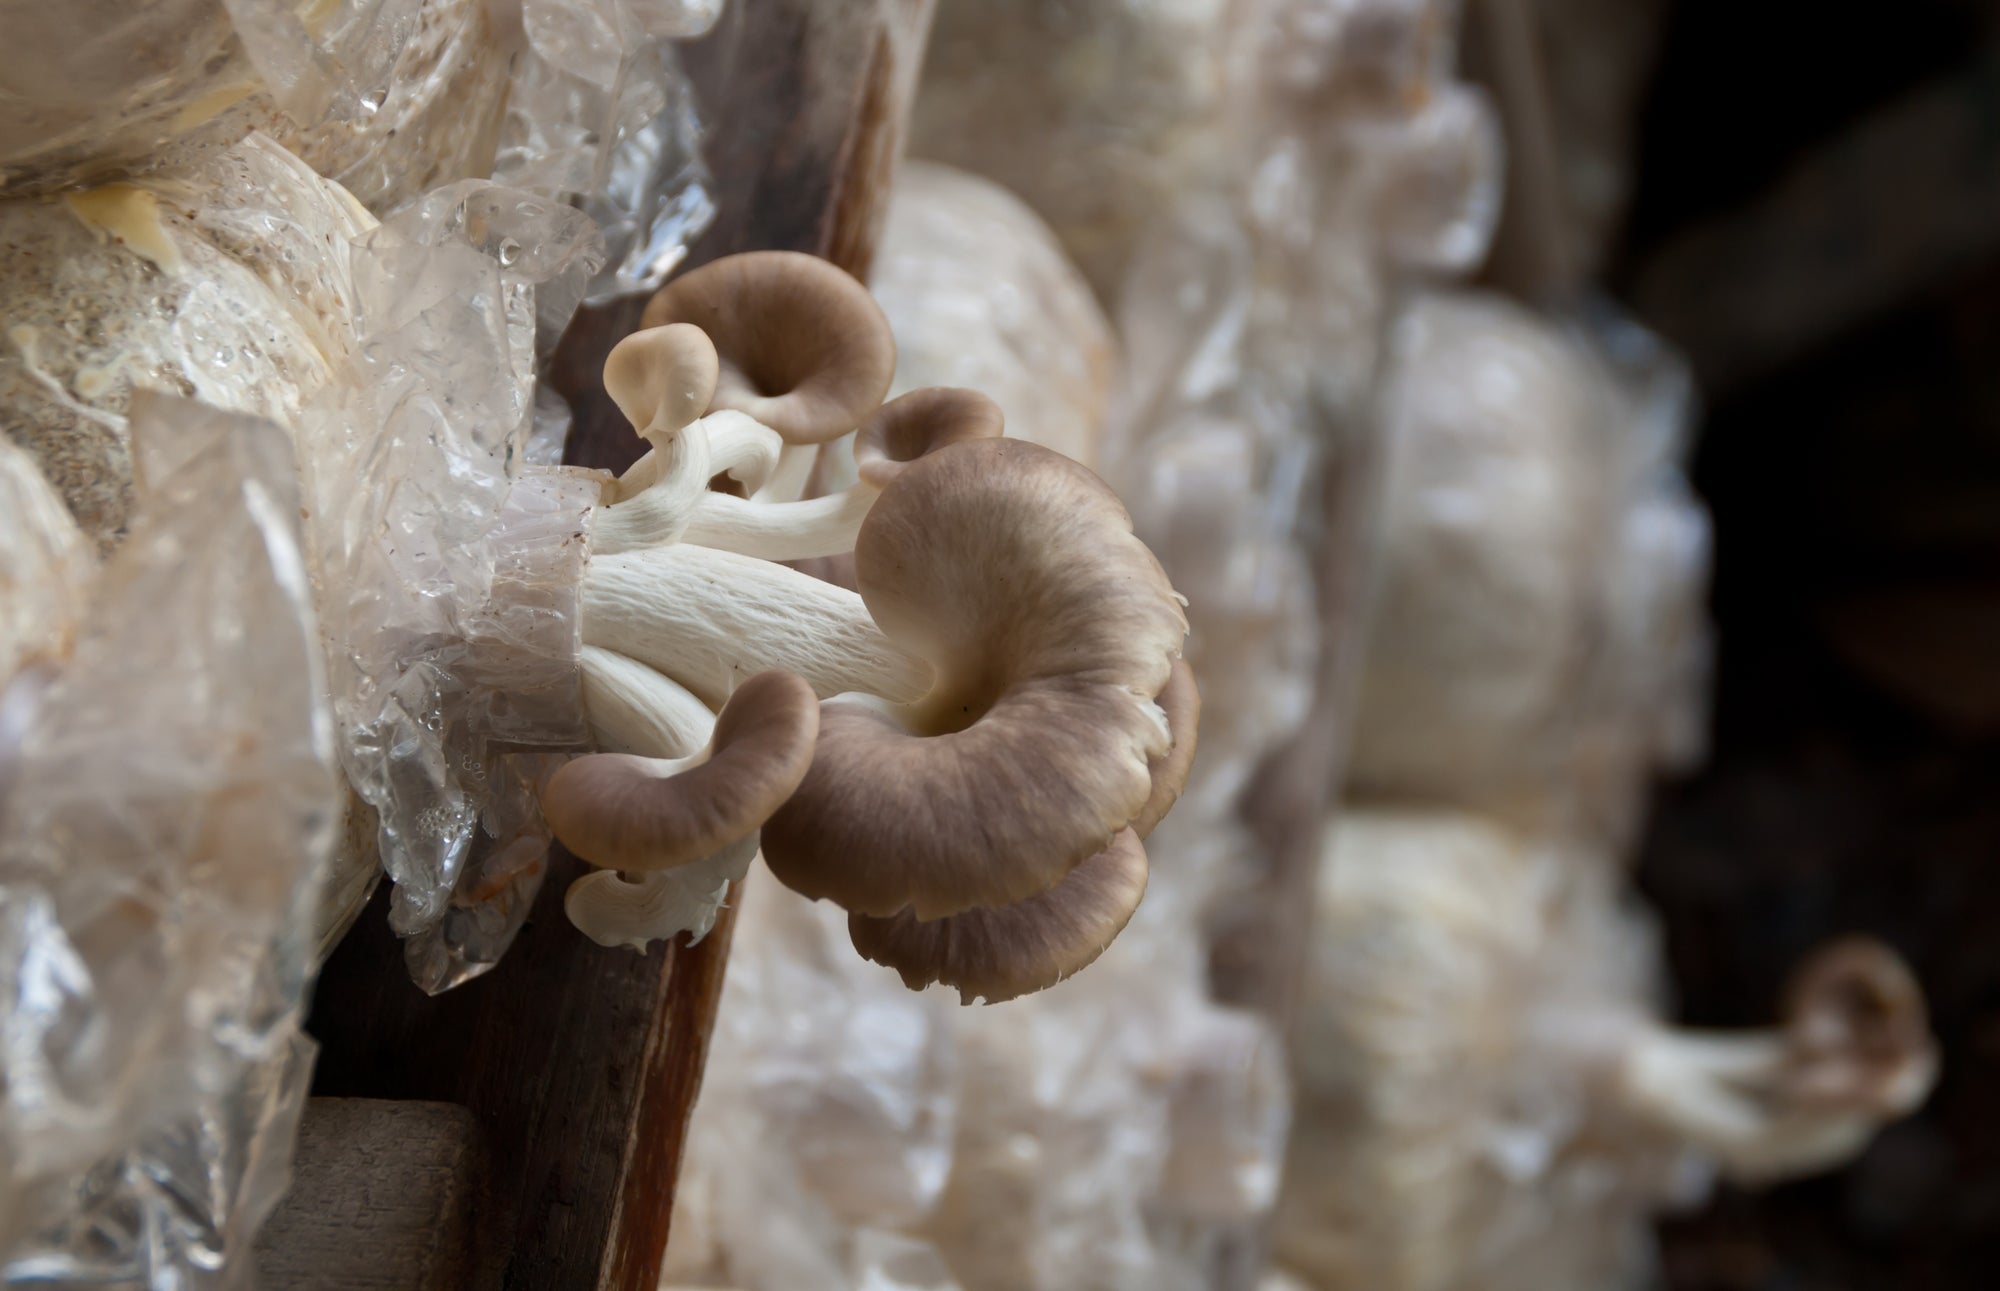 Excellent 101 on Jack Frost Mushrooms: The Cold's Delight